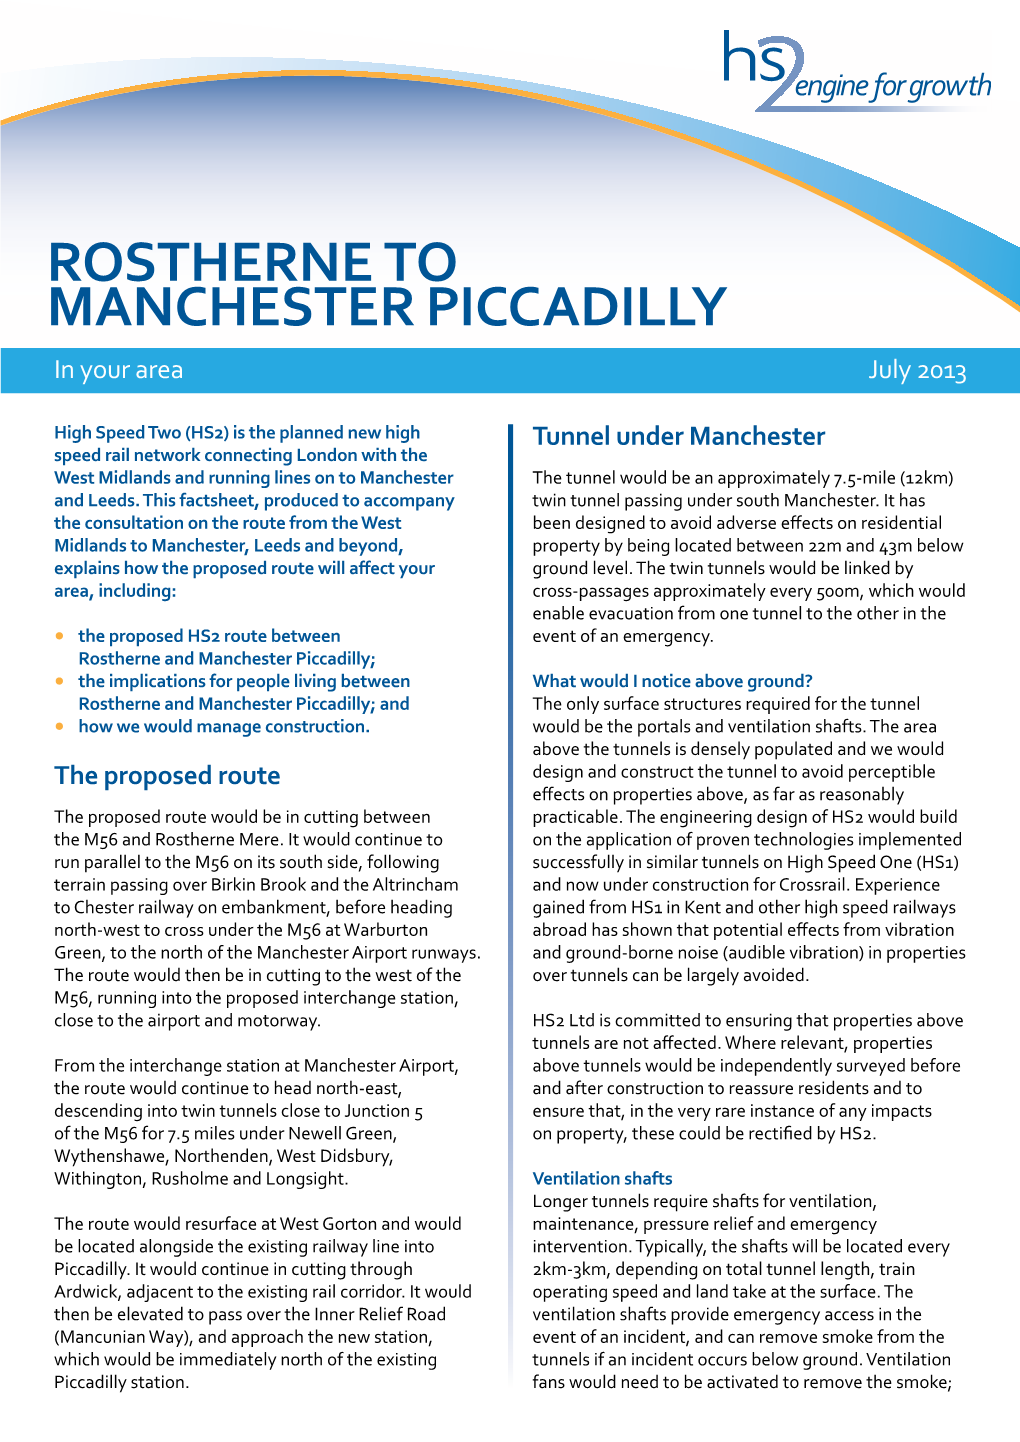 ROSTHERNE to MANCHESTER PICCADILLY in Your Area July 2013